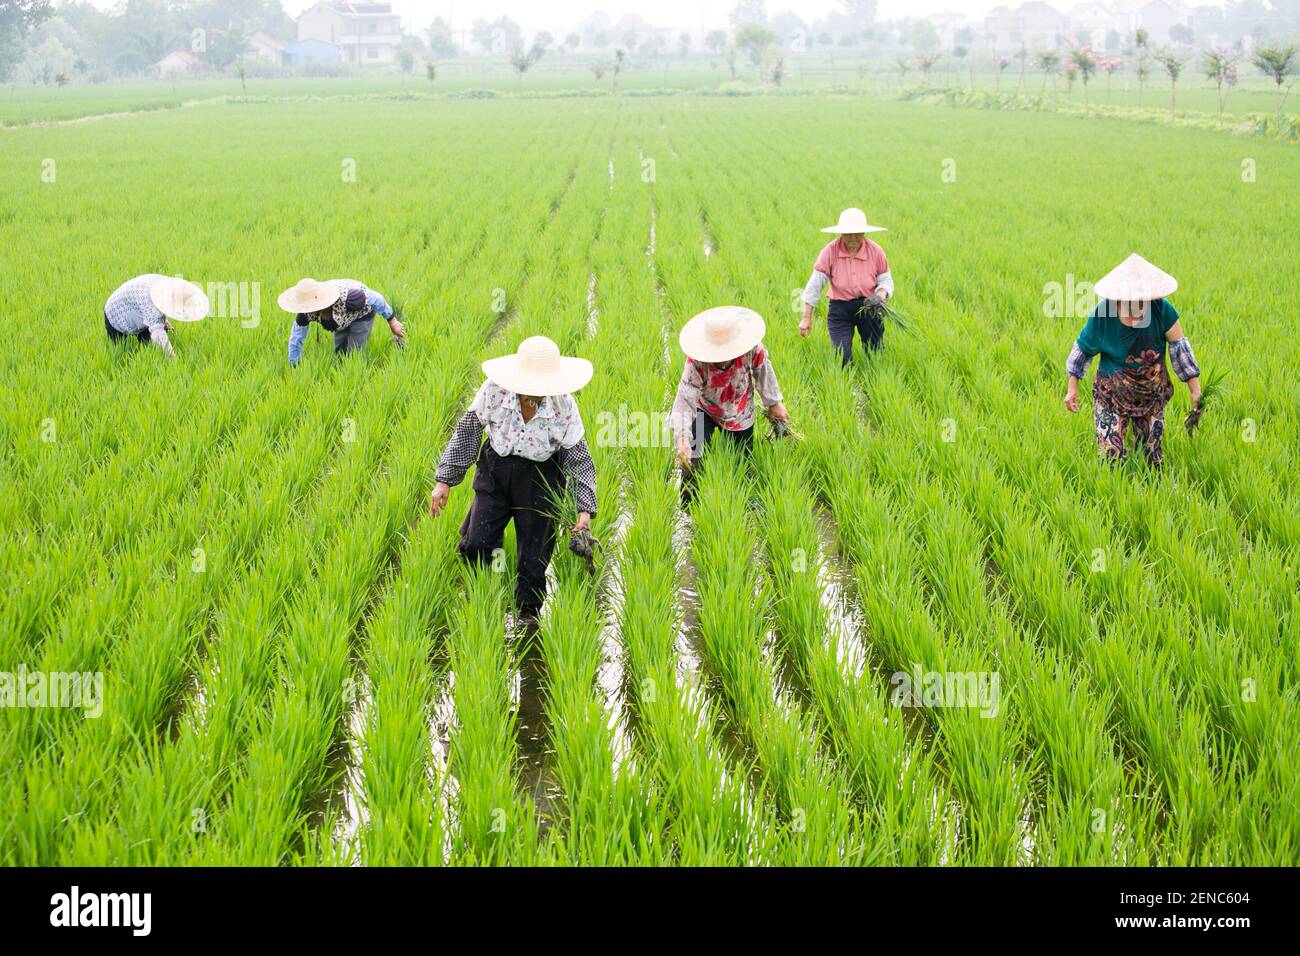 Jiangsu,CHINA-Members of agricultural land stock cooperative of Hexing village, Baipu town, Rugao city, Jiangsu province, conduct weeding and field management in the organic rice fields planted by the cooperative on July 24, 2019.In recent years, in the process of implementing targeted poverty alleviation, Hexing village has effectively solved the problems such as the difficulty in increasing farmers' income by adopting a new land transfer operation mode of 'land conversion to equity, farmers as shareholders, and income sharing'.(EDITORIAL USE ONLY. CHINA OUT) (Photo by /Sipa USA) Stock Photo